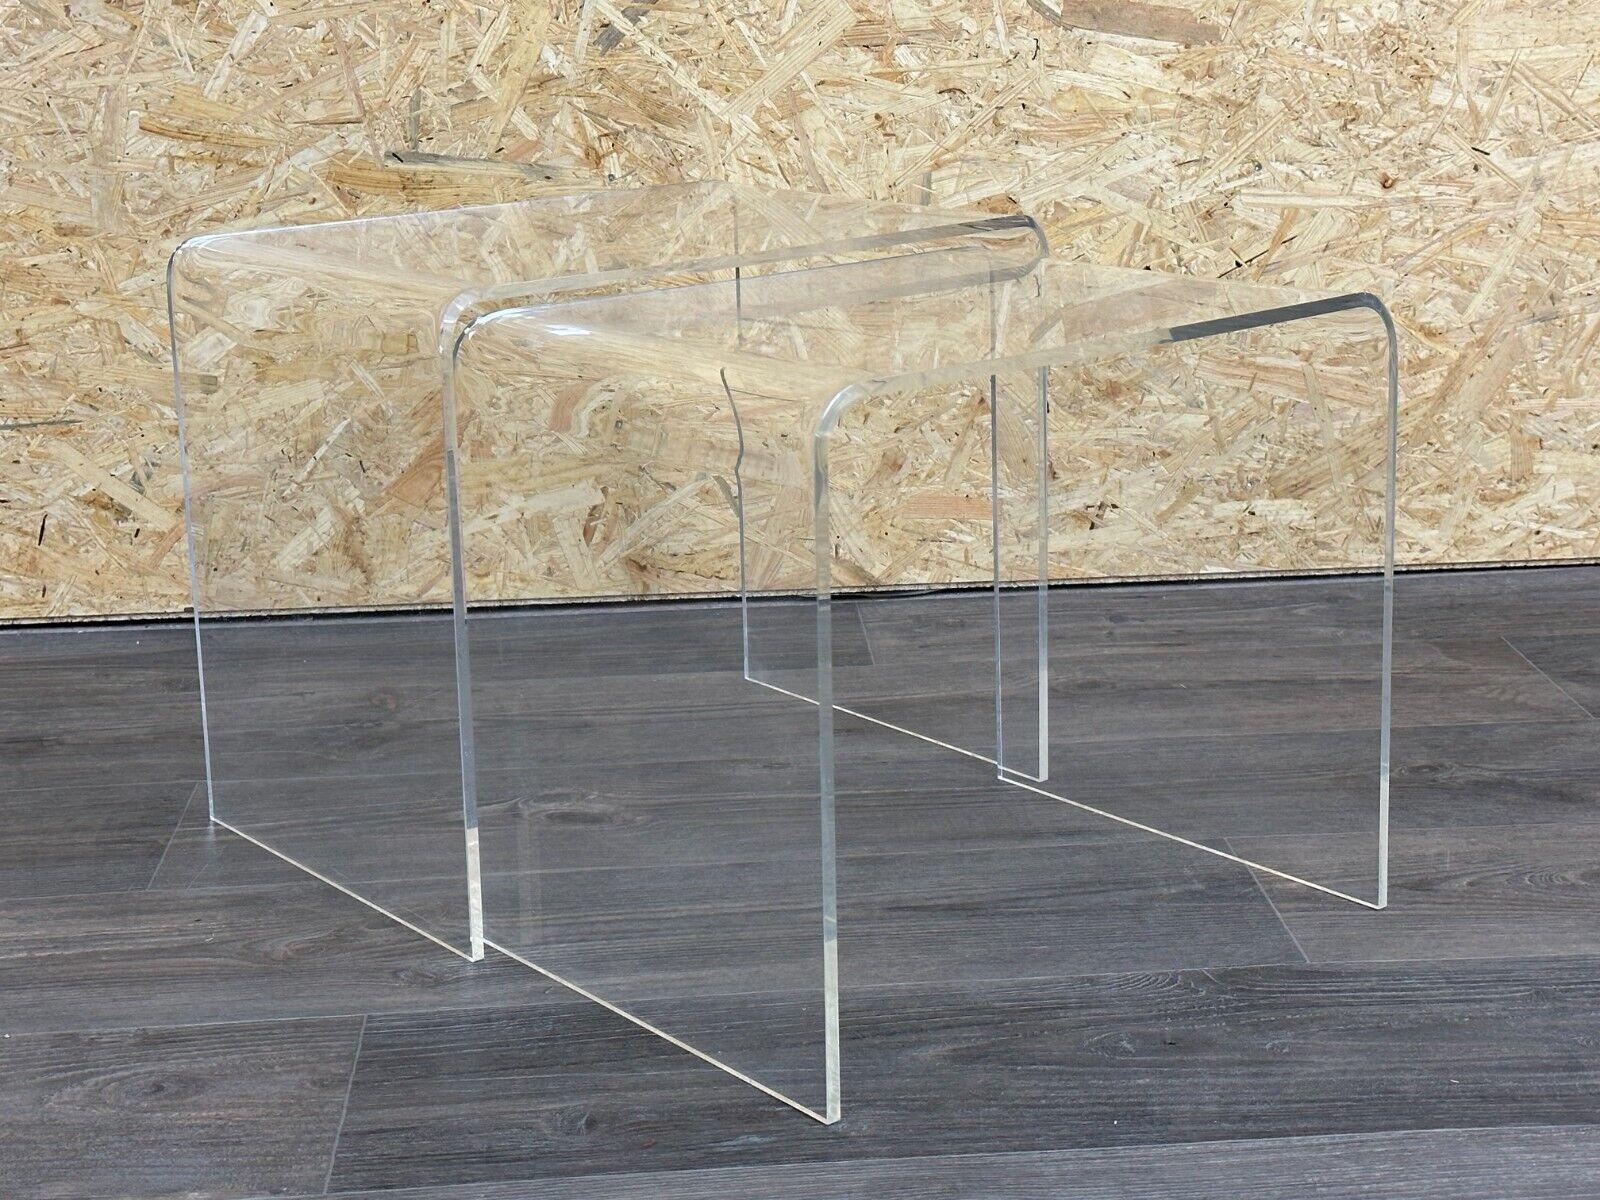 60s 70s Side Tables Nesting Tables Acrylic Plastic Space Age Design

Object: 2x side table

Manufacturer:

Condition: good - vintage

Age: around 1960-1970

Dimensions:

Width = 45cm
Depth = 32cm
Height = 38cm
(biggest table)

Other notes:

The